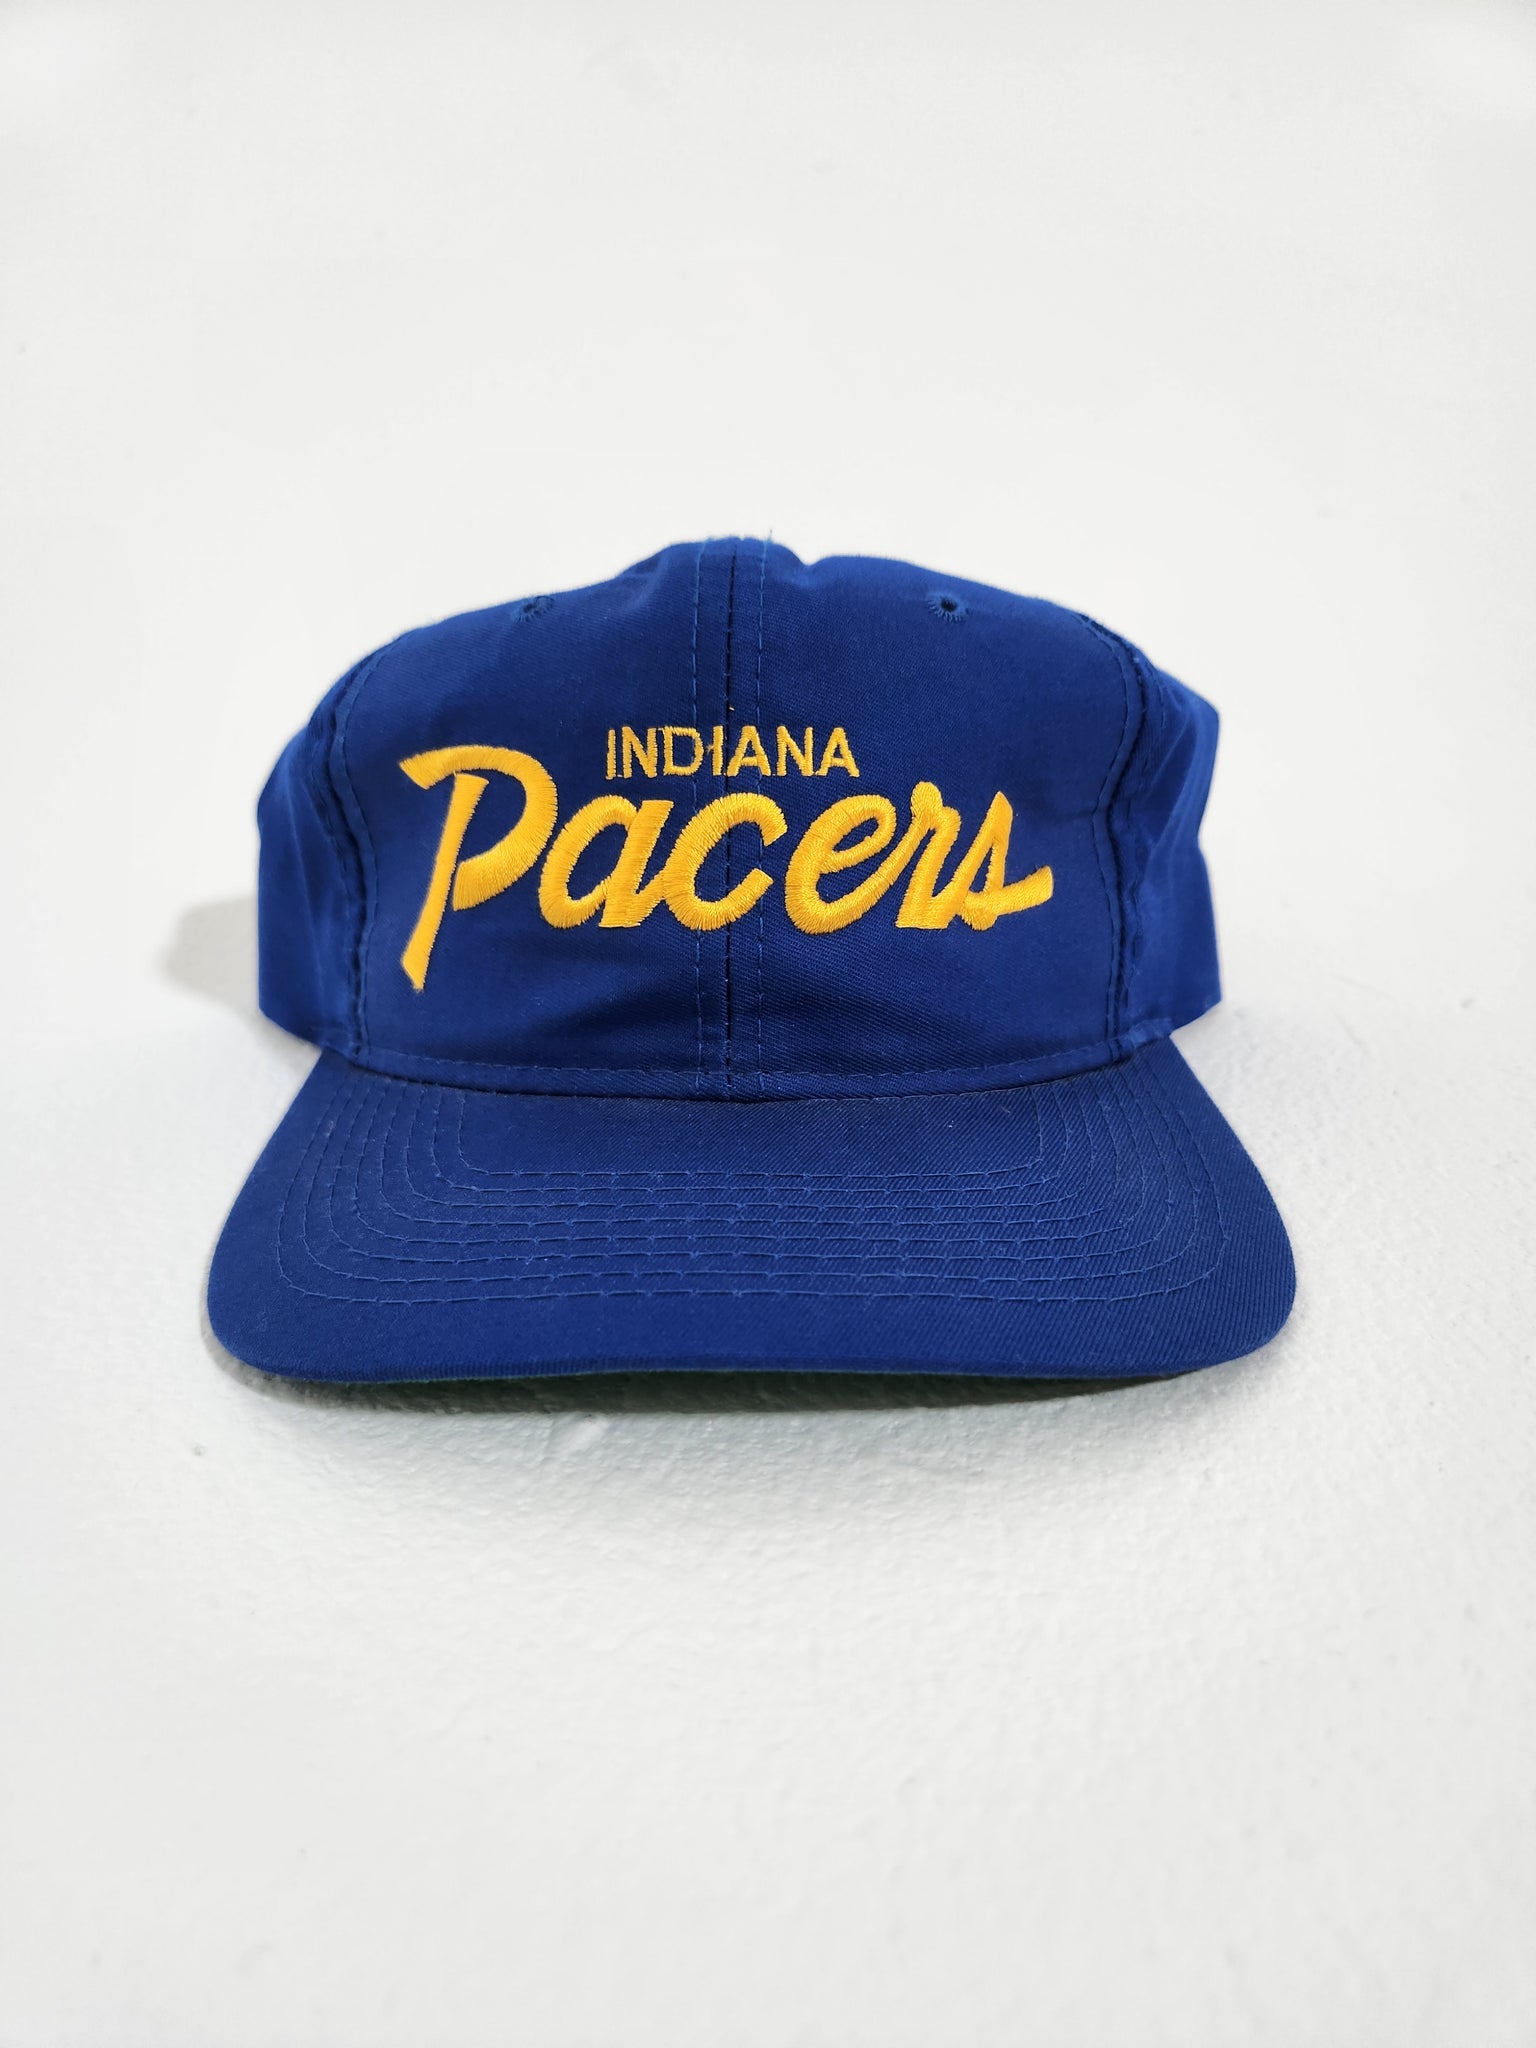 Vintage 1990s NBA Indiana Pacers Script Sports Specialties Twill Snapb